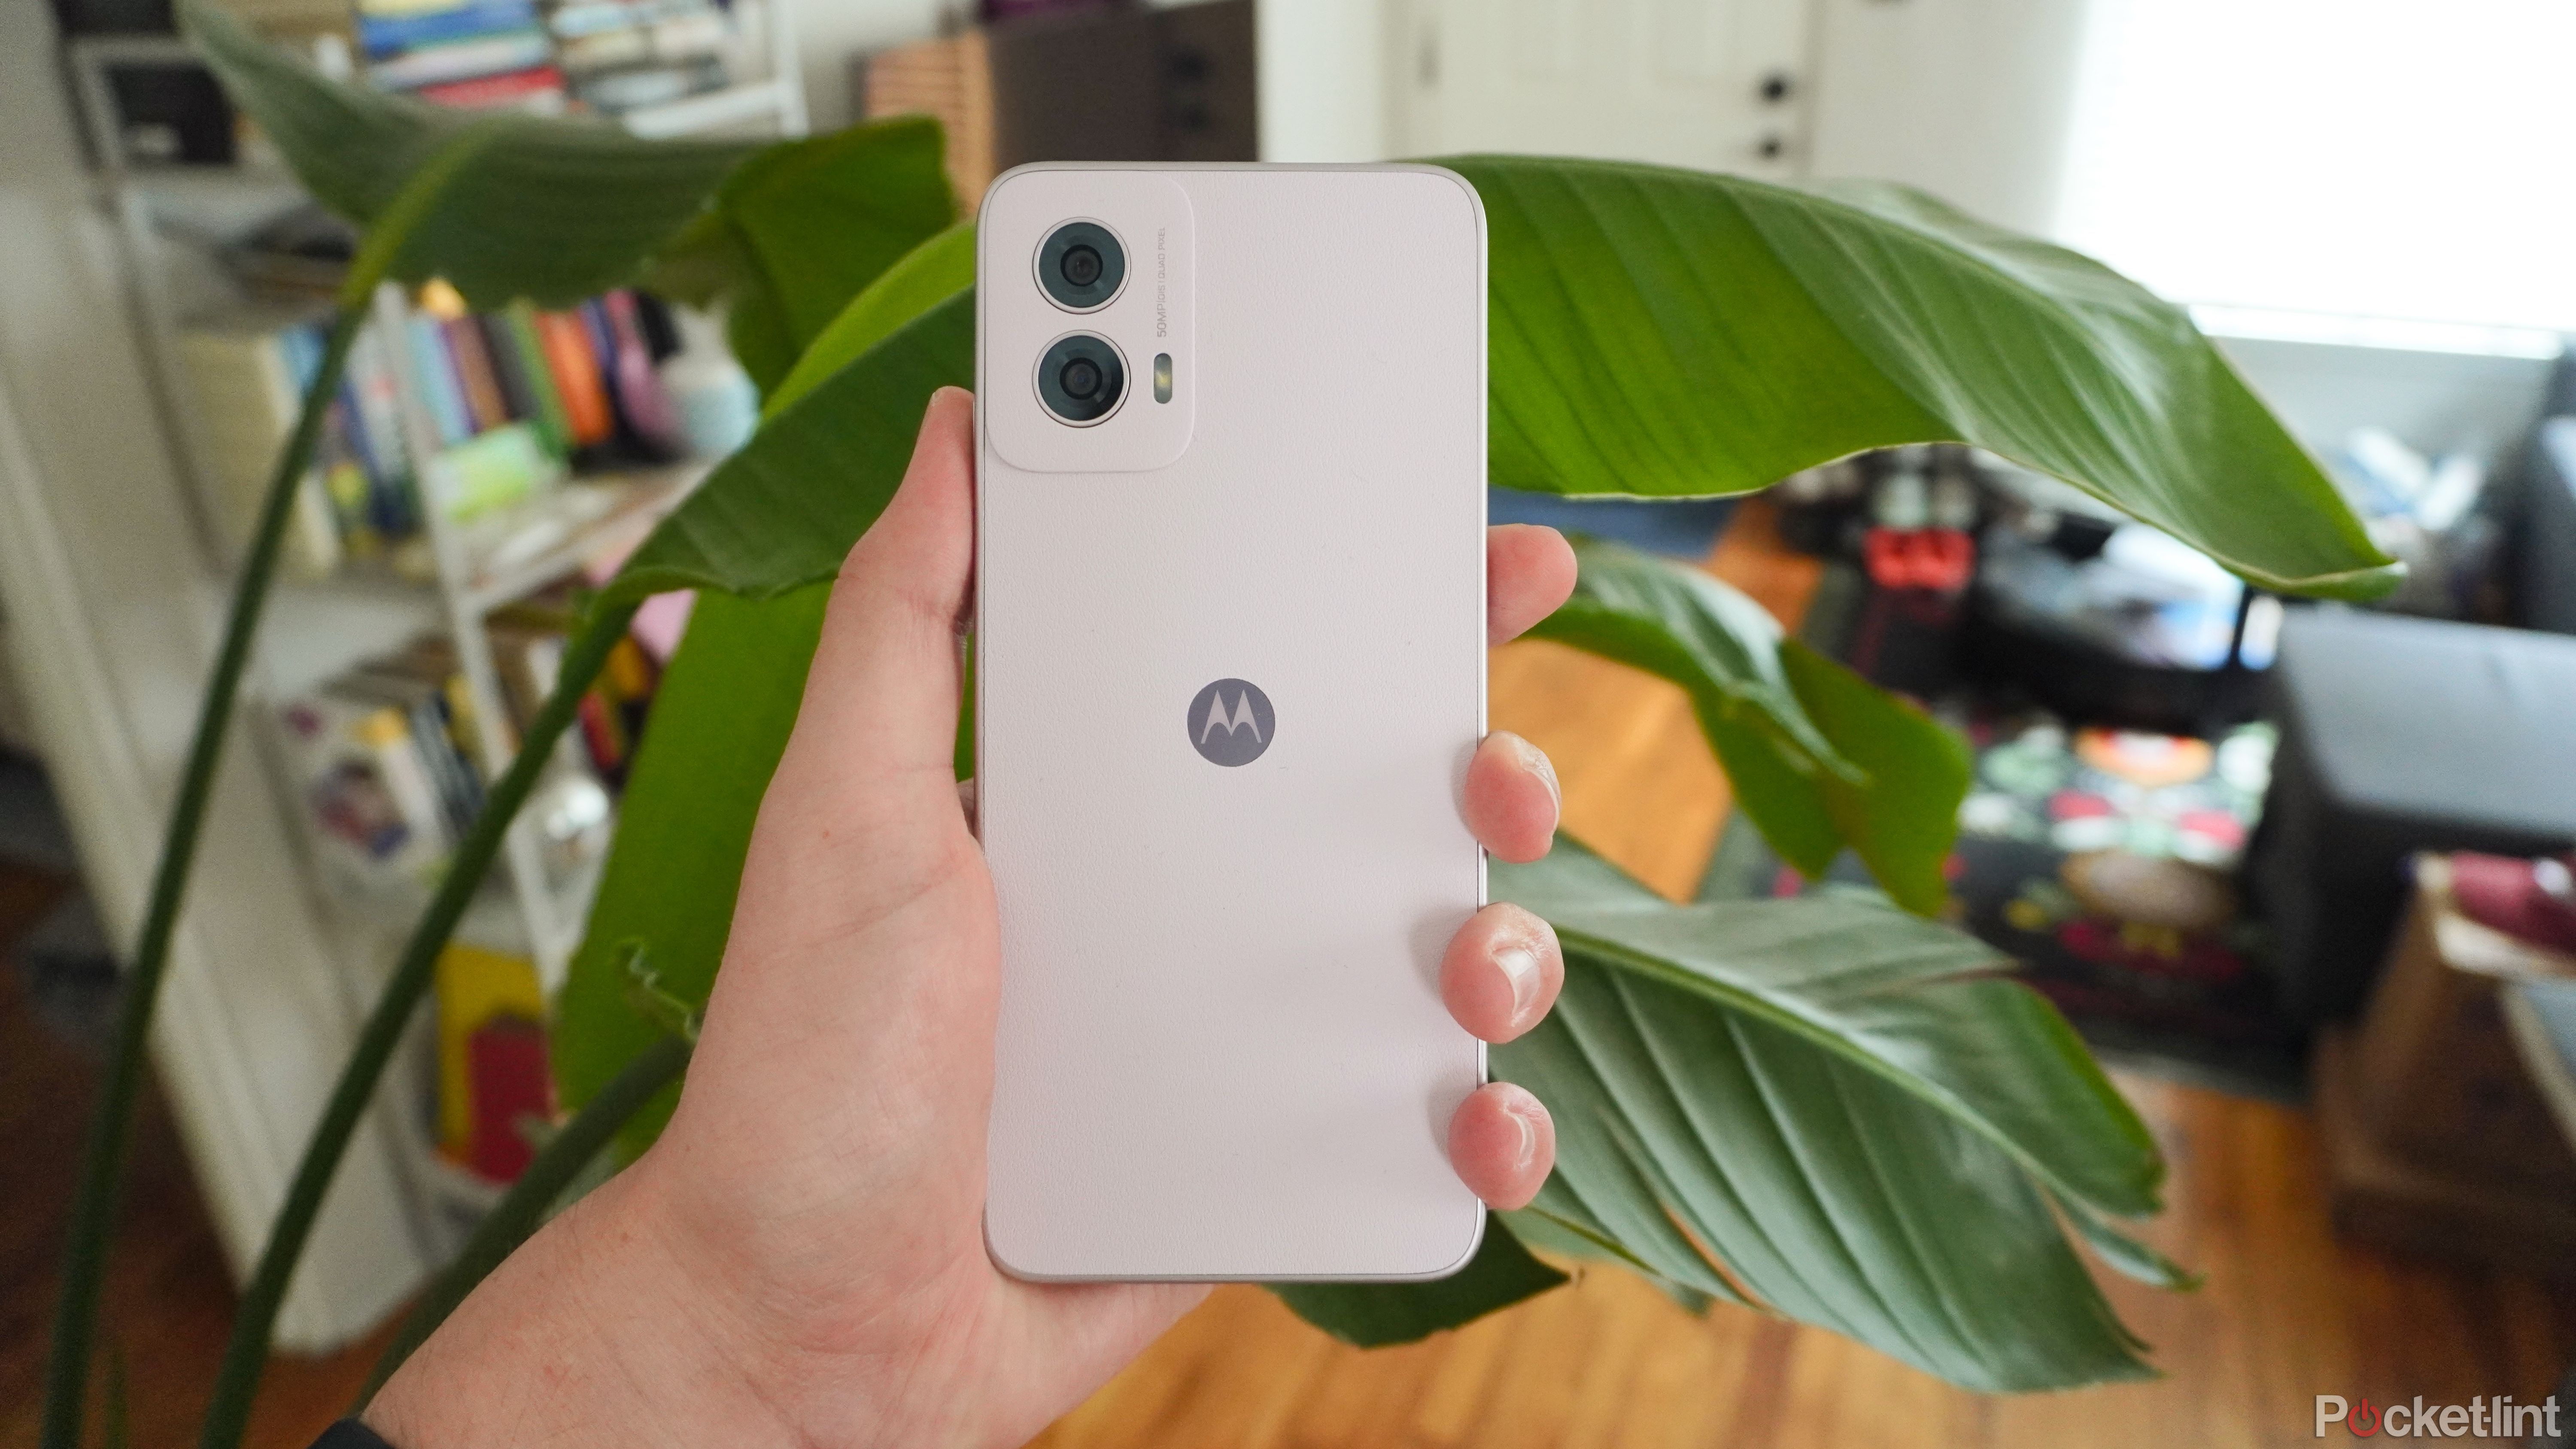 The lilac Moto G Power 5G's back held in front of a green plant.